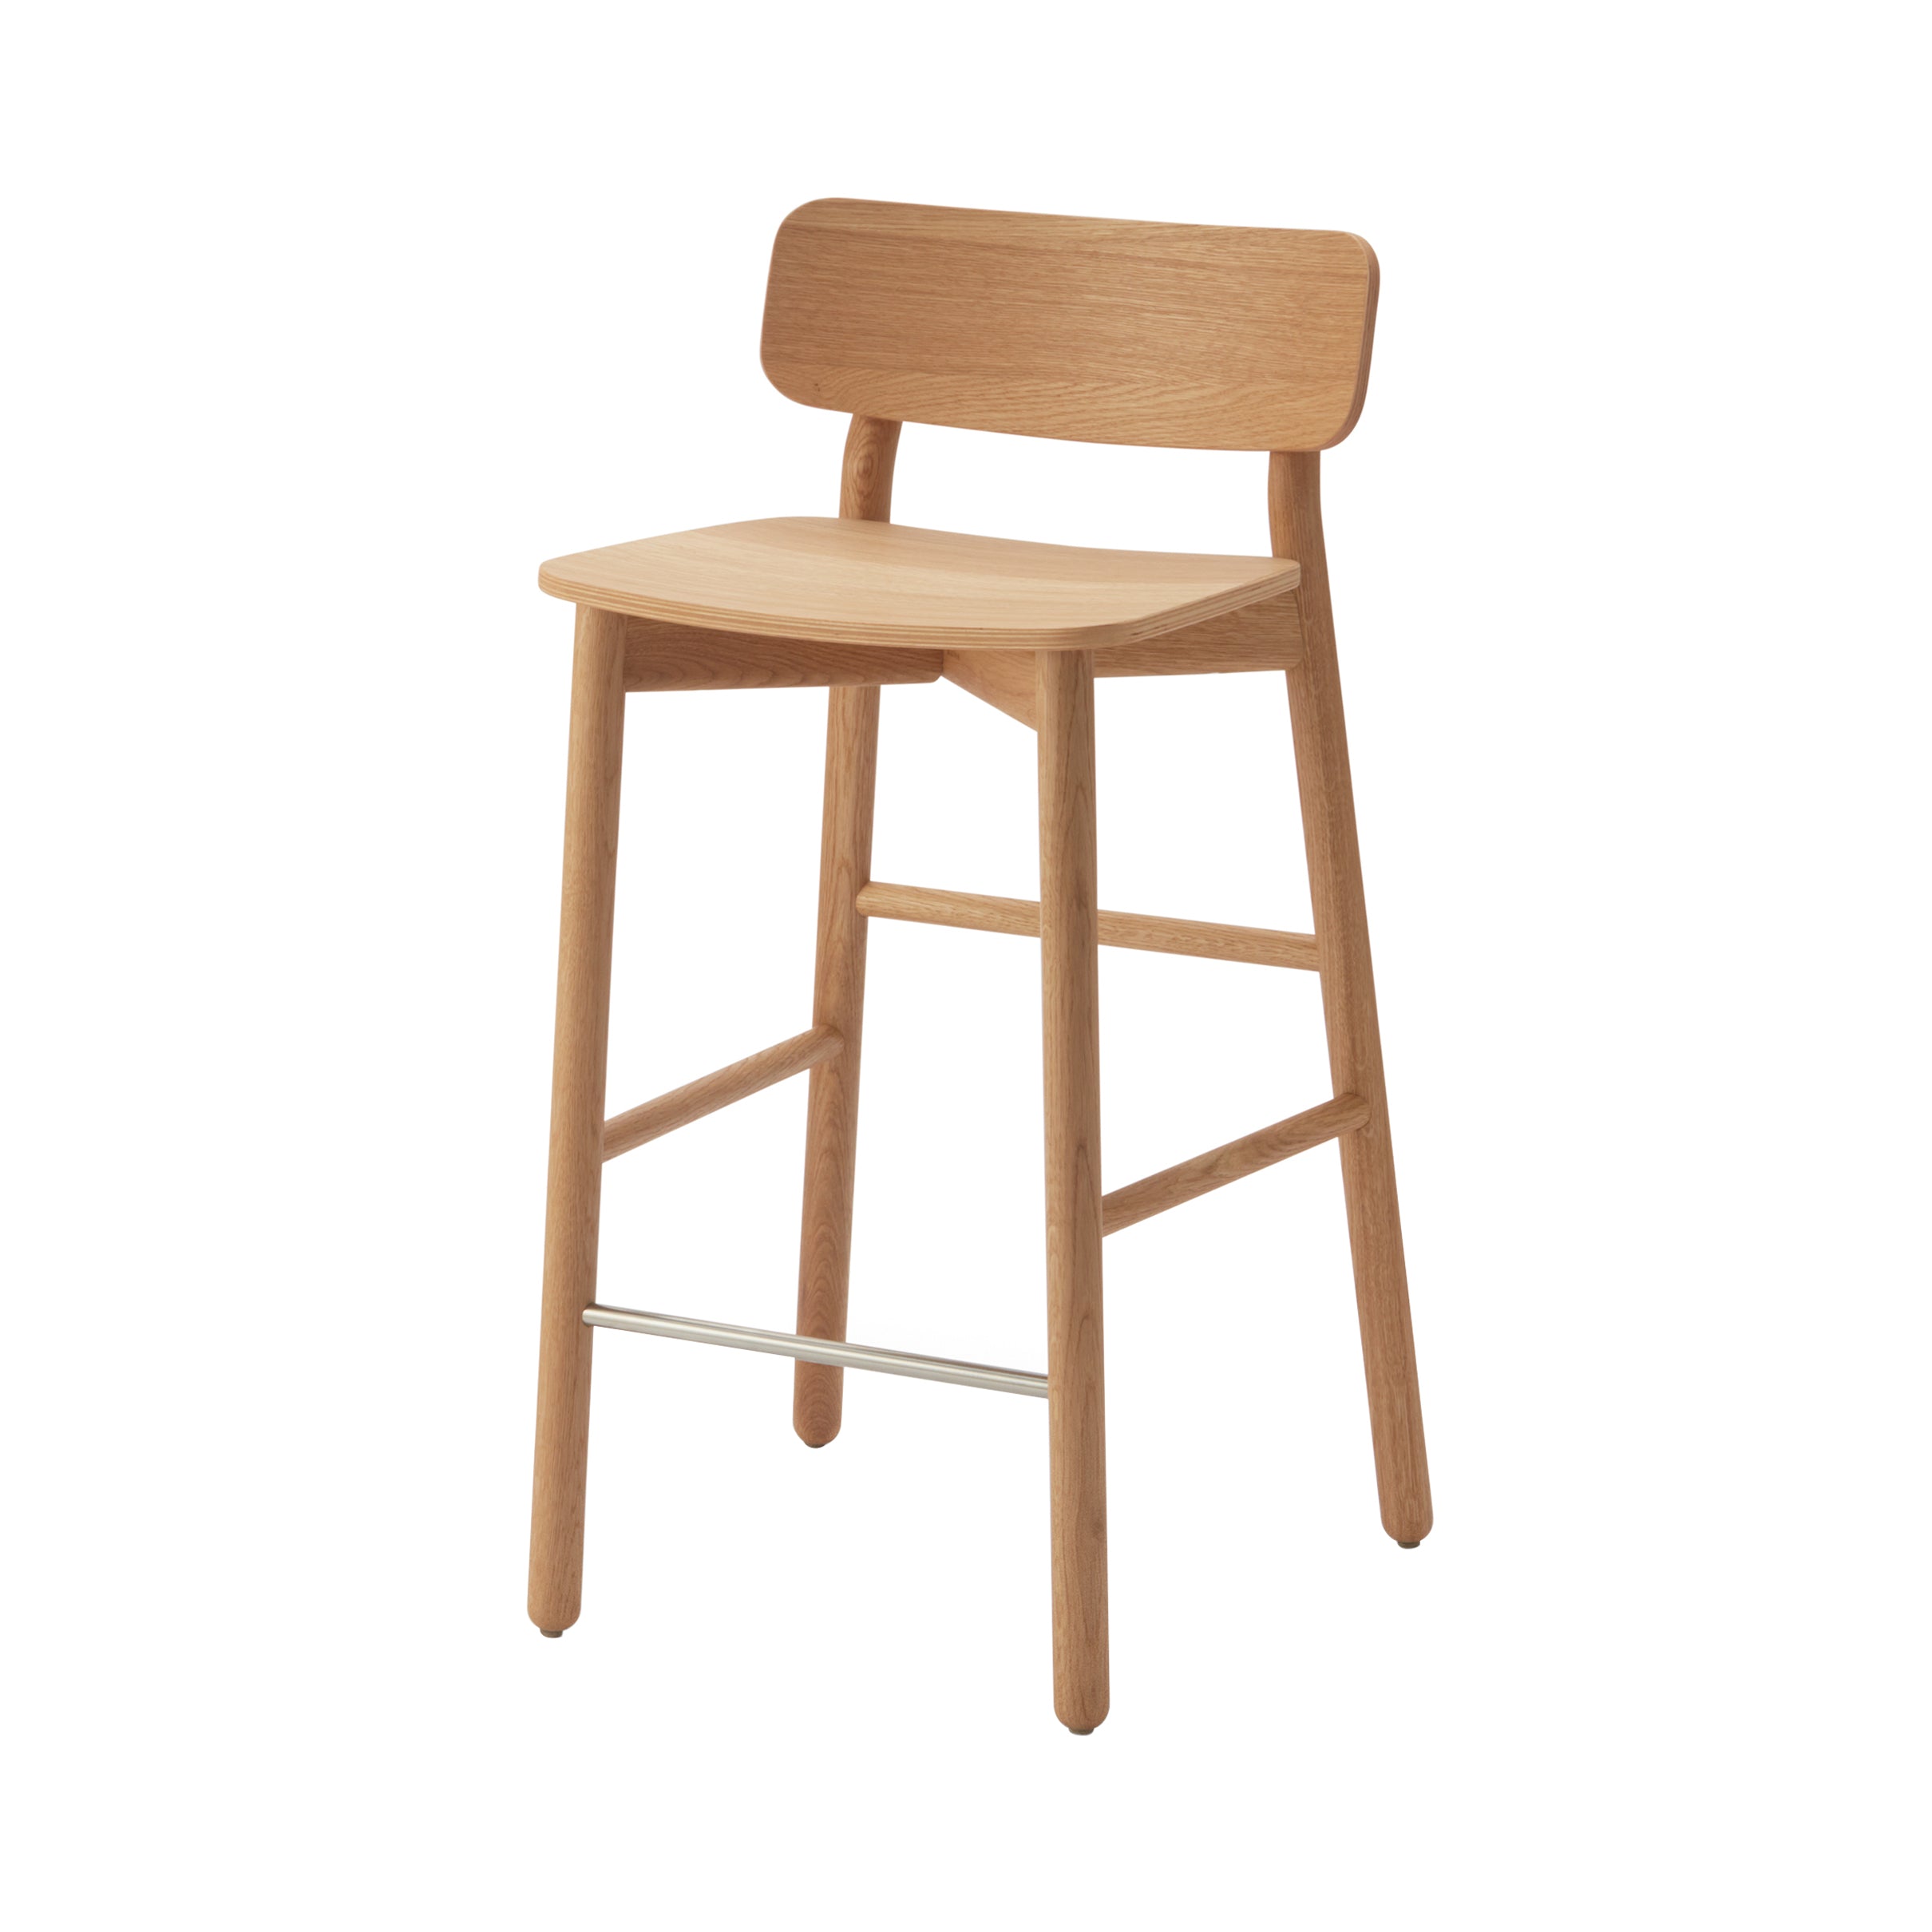 Hven Bar Stool: Oil Oak + Without Cushion